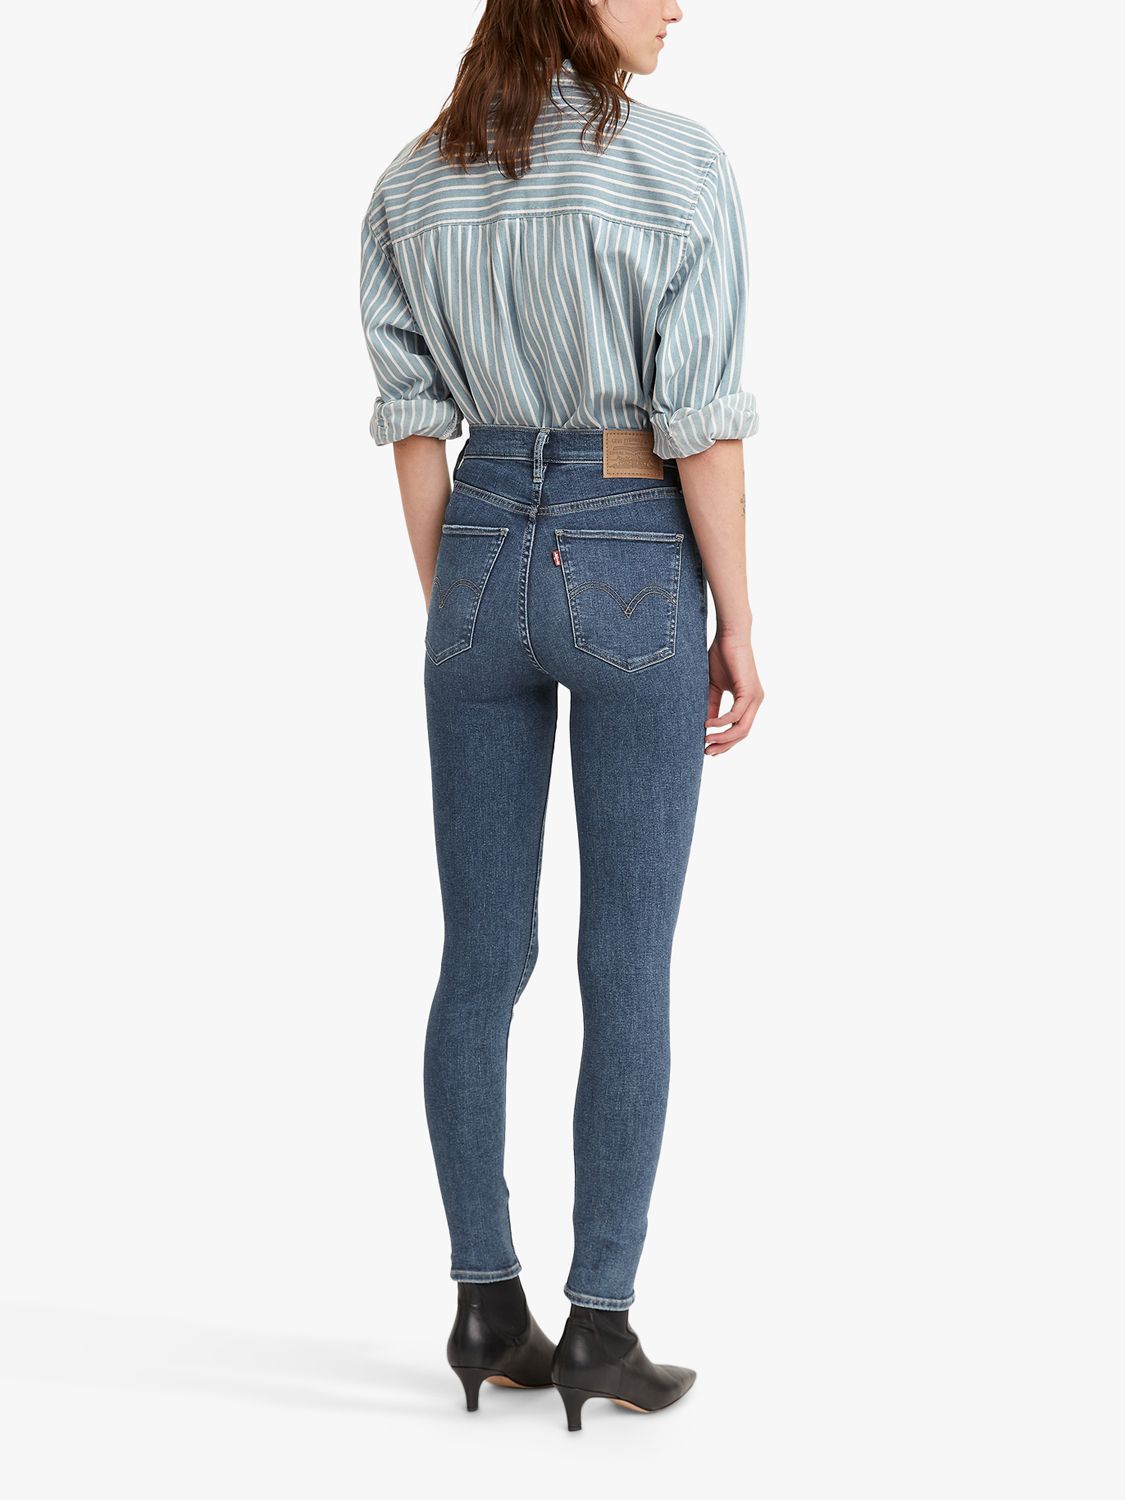 Levi's Mile High Extra High Rise Super Skinny Ankle Jeans, Venice For Real